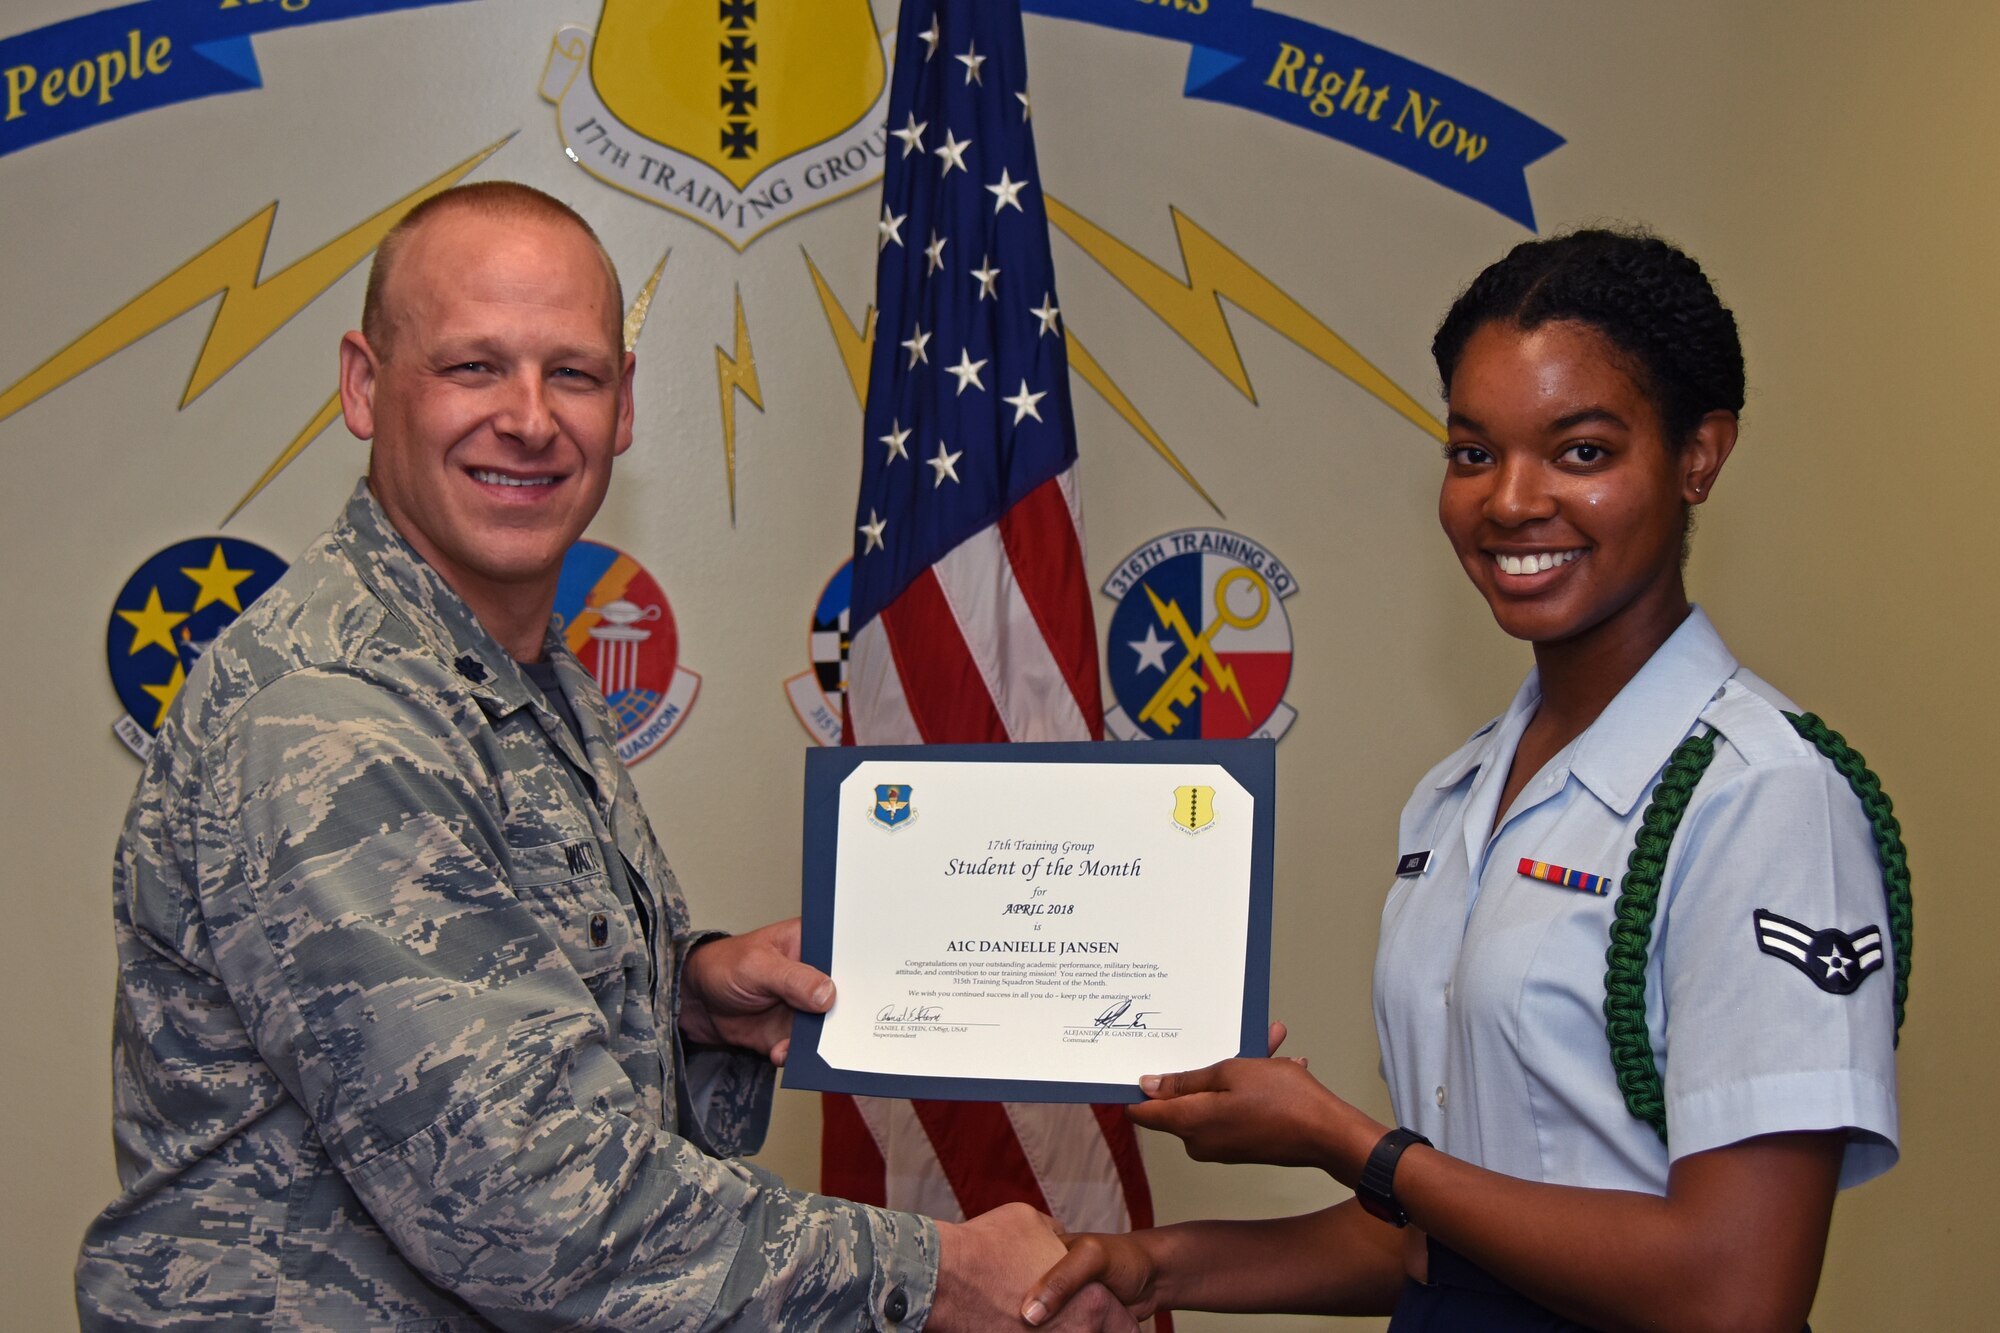 U.S. Air Force Lt. Col. Steven Watts, 17th Training Group deputy commander, presents the 315th Training Squadron Student of the Month award to Airman 1st Class Danielle Jansen, 315th TRS trainee, at Brandenburg Hall on Goodfellow Air Force Base, Texas, May 4, 2018. The 315th TRS’s vision is to develop combat-ready intelligence, surveillance and reconnaissance professionals and promote an innovative squadron culture and identity unmatched across the U.S. Air Force. (U.S. Air Force photo by Airman 1st Class Zachary Chapman/Released)